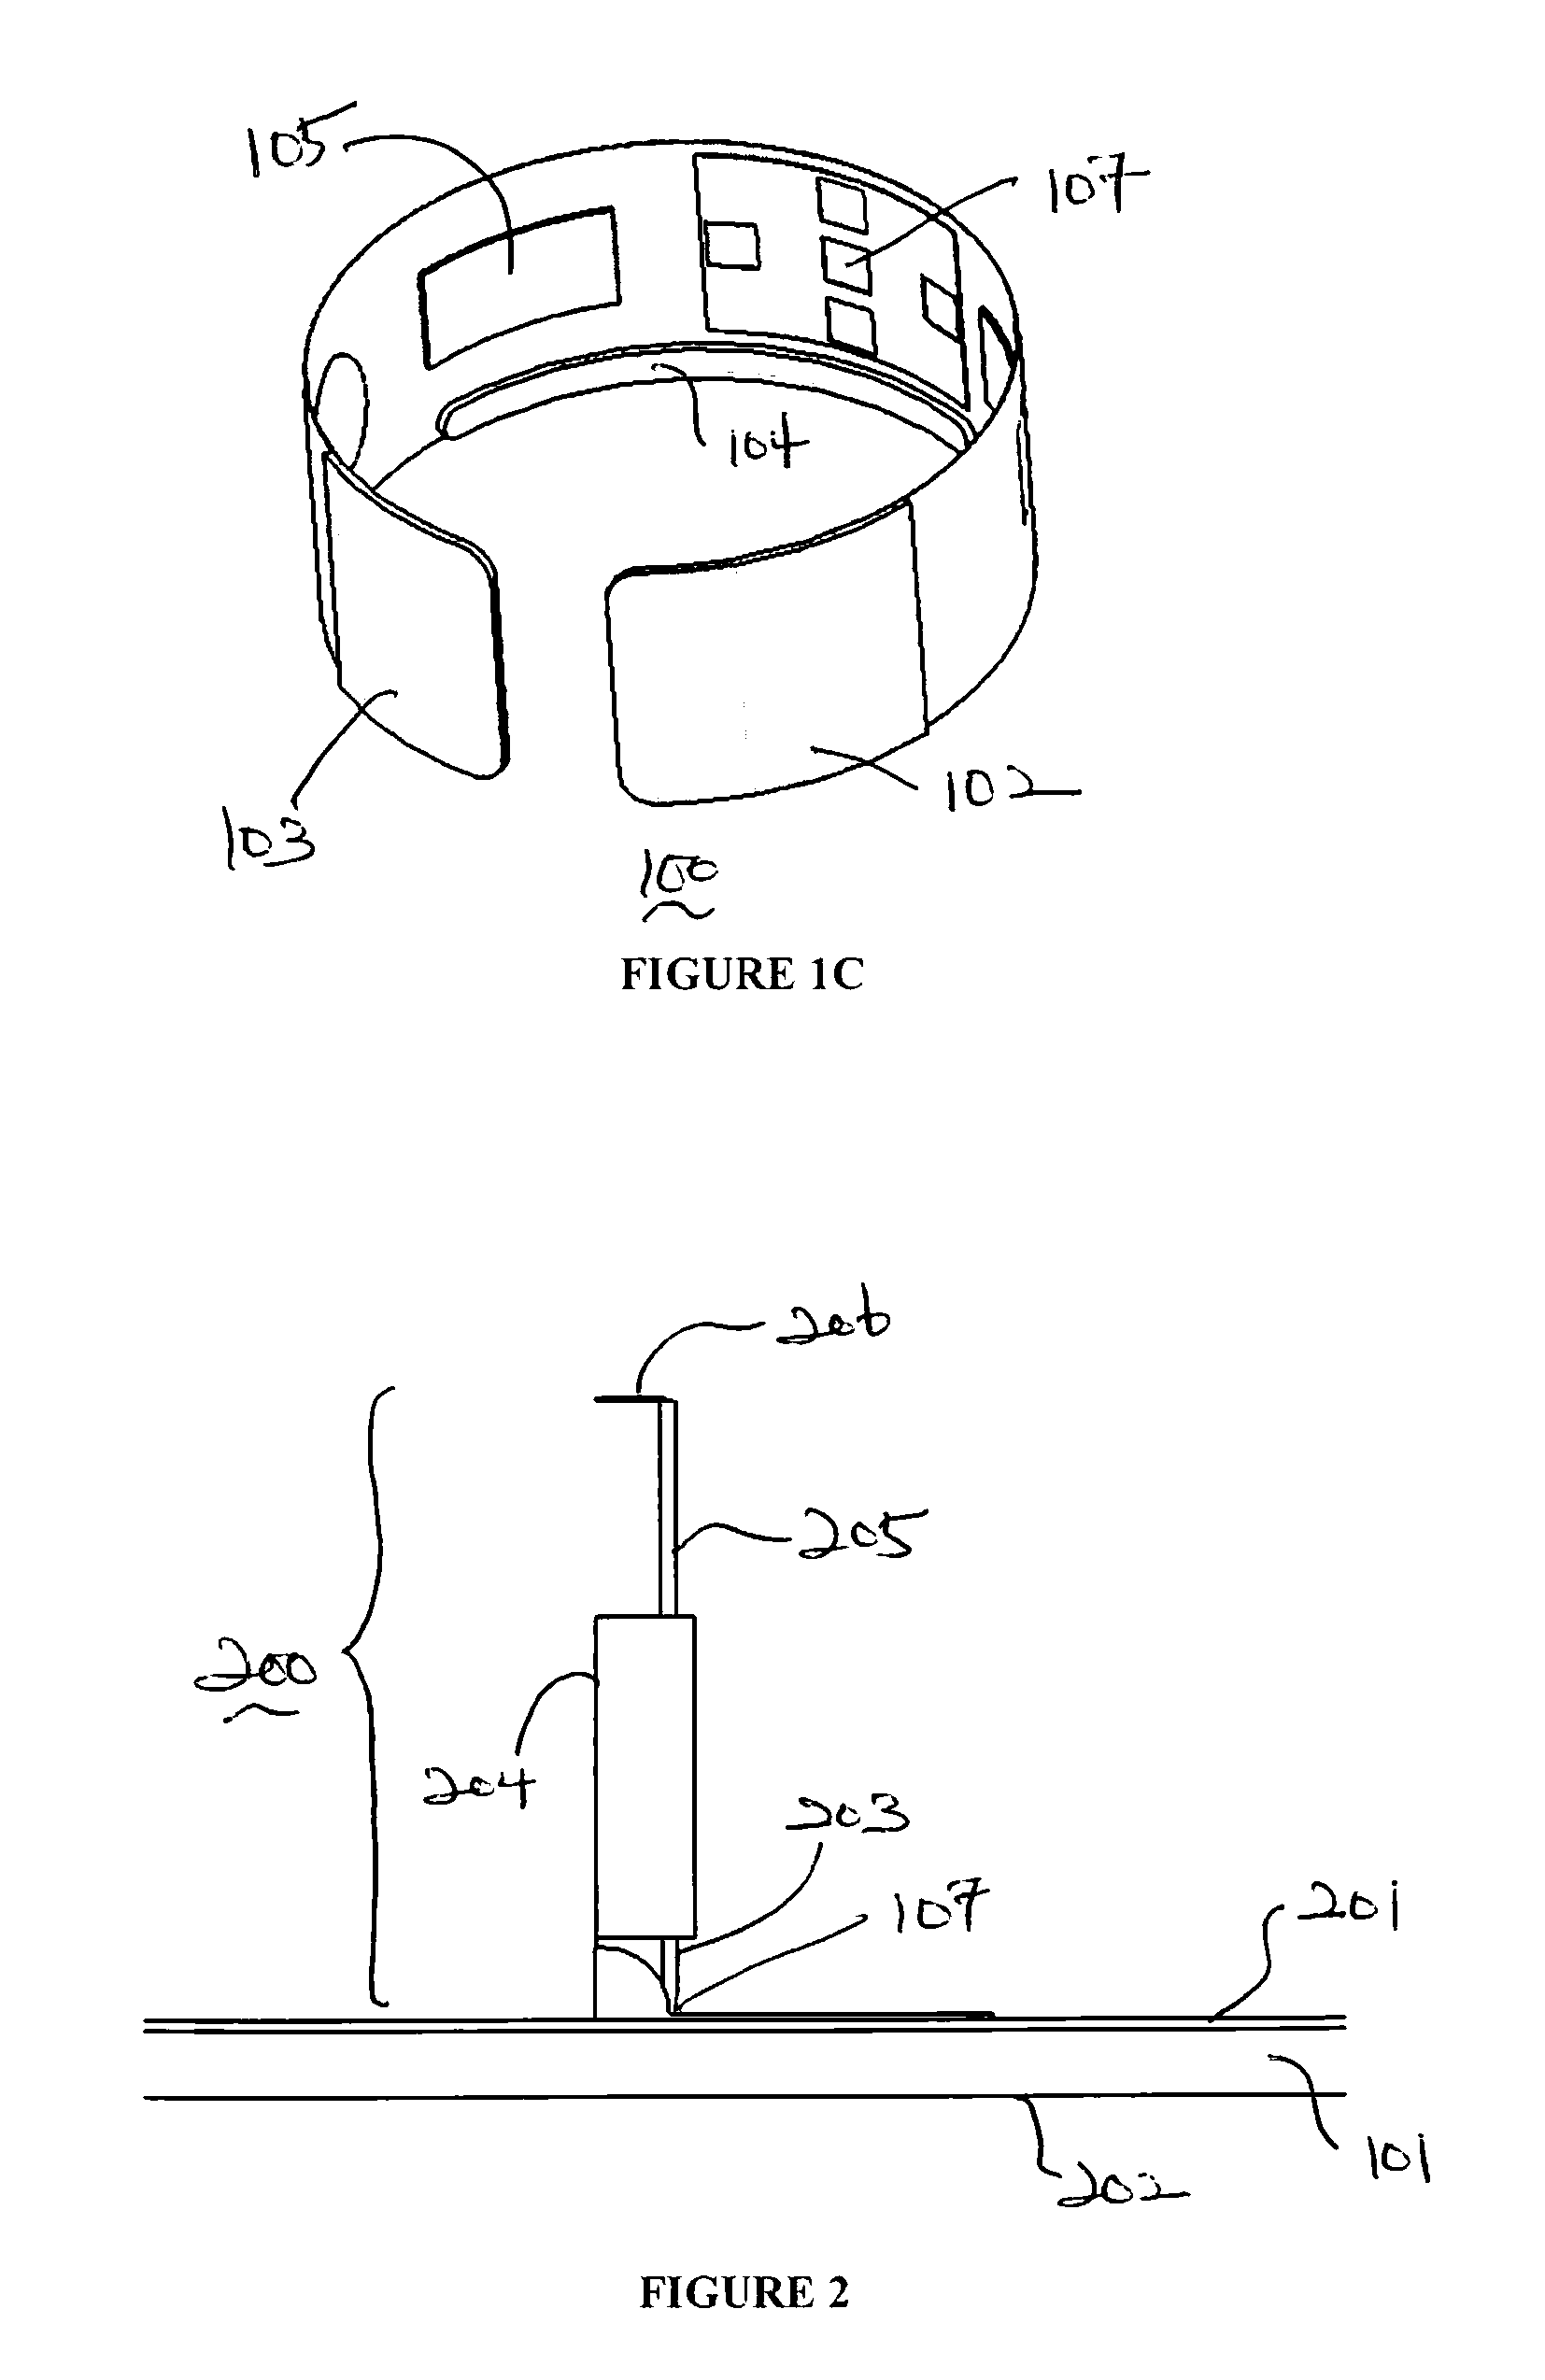 Integrated transmitter unit and sensor introducer mechanism and methods of use